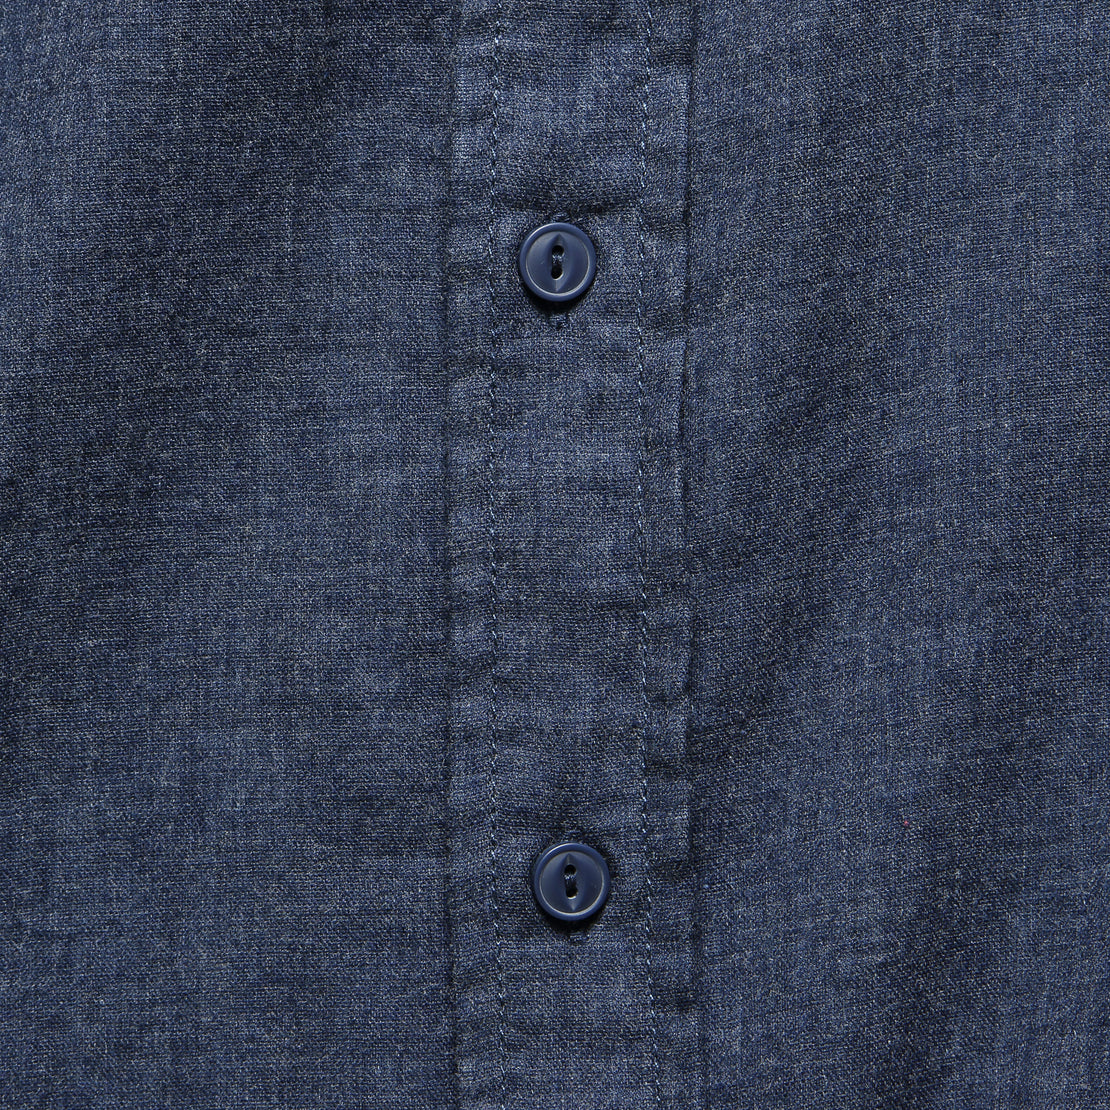 Hattox Double Cloth Shirt - Navy Heather - Grayers - STAG Provisions - Tops - L/S Woven - Solid